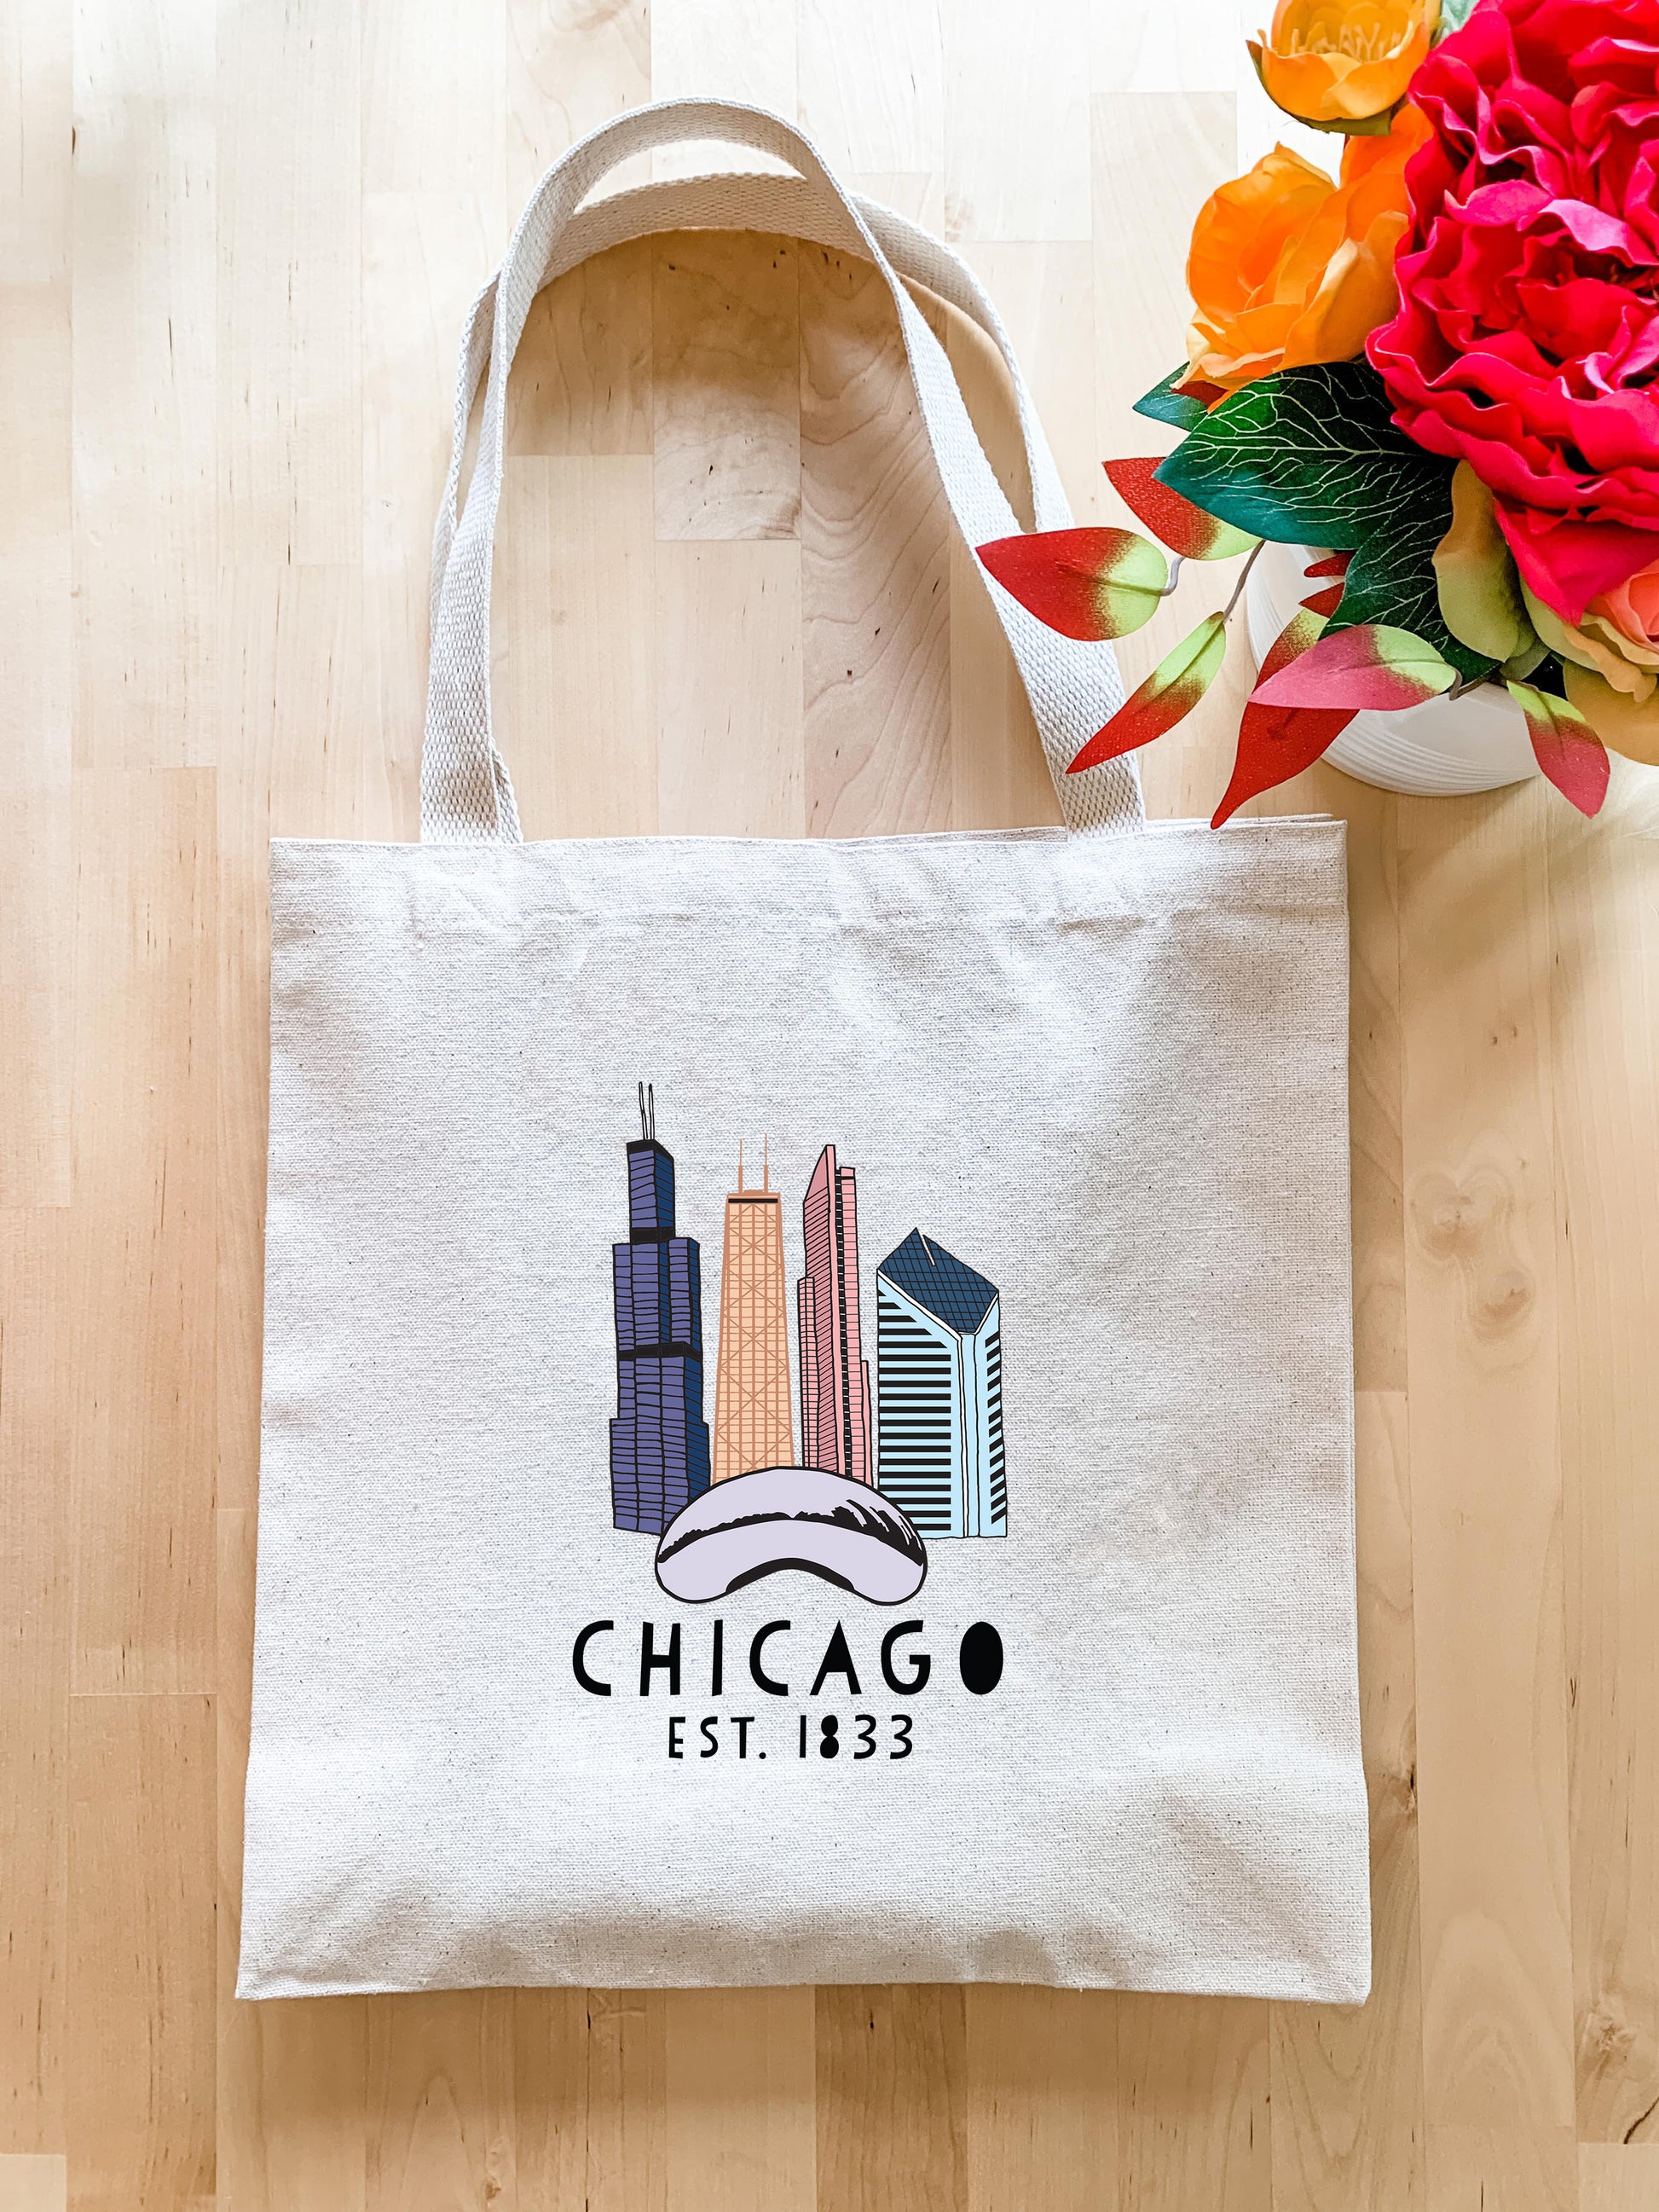 a chicago bag sitting on a table next to a vase of flowers